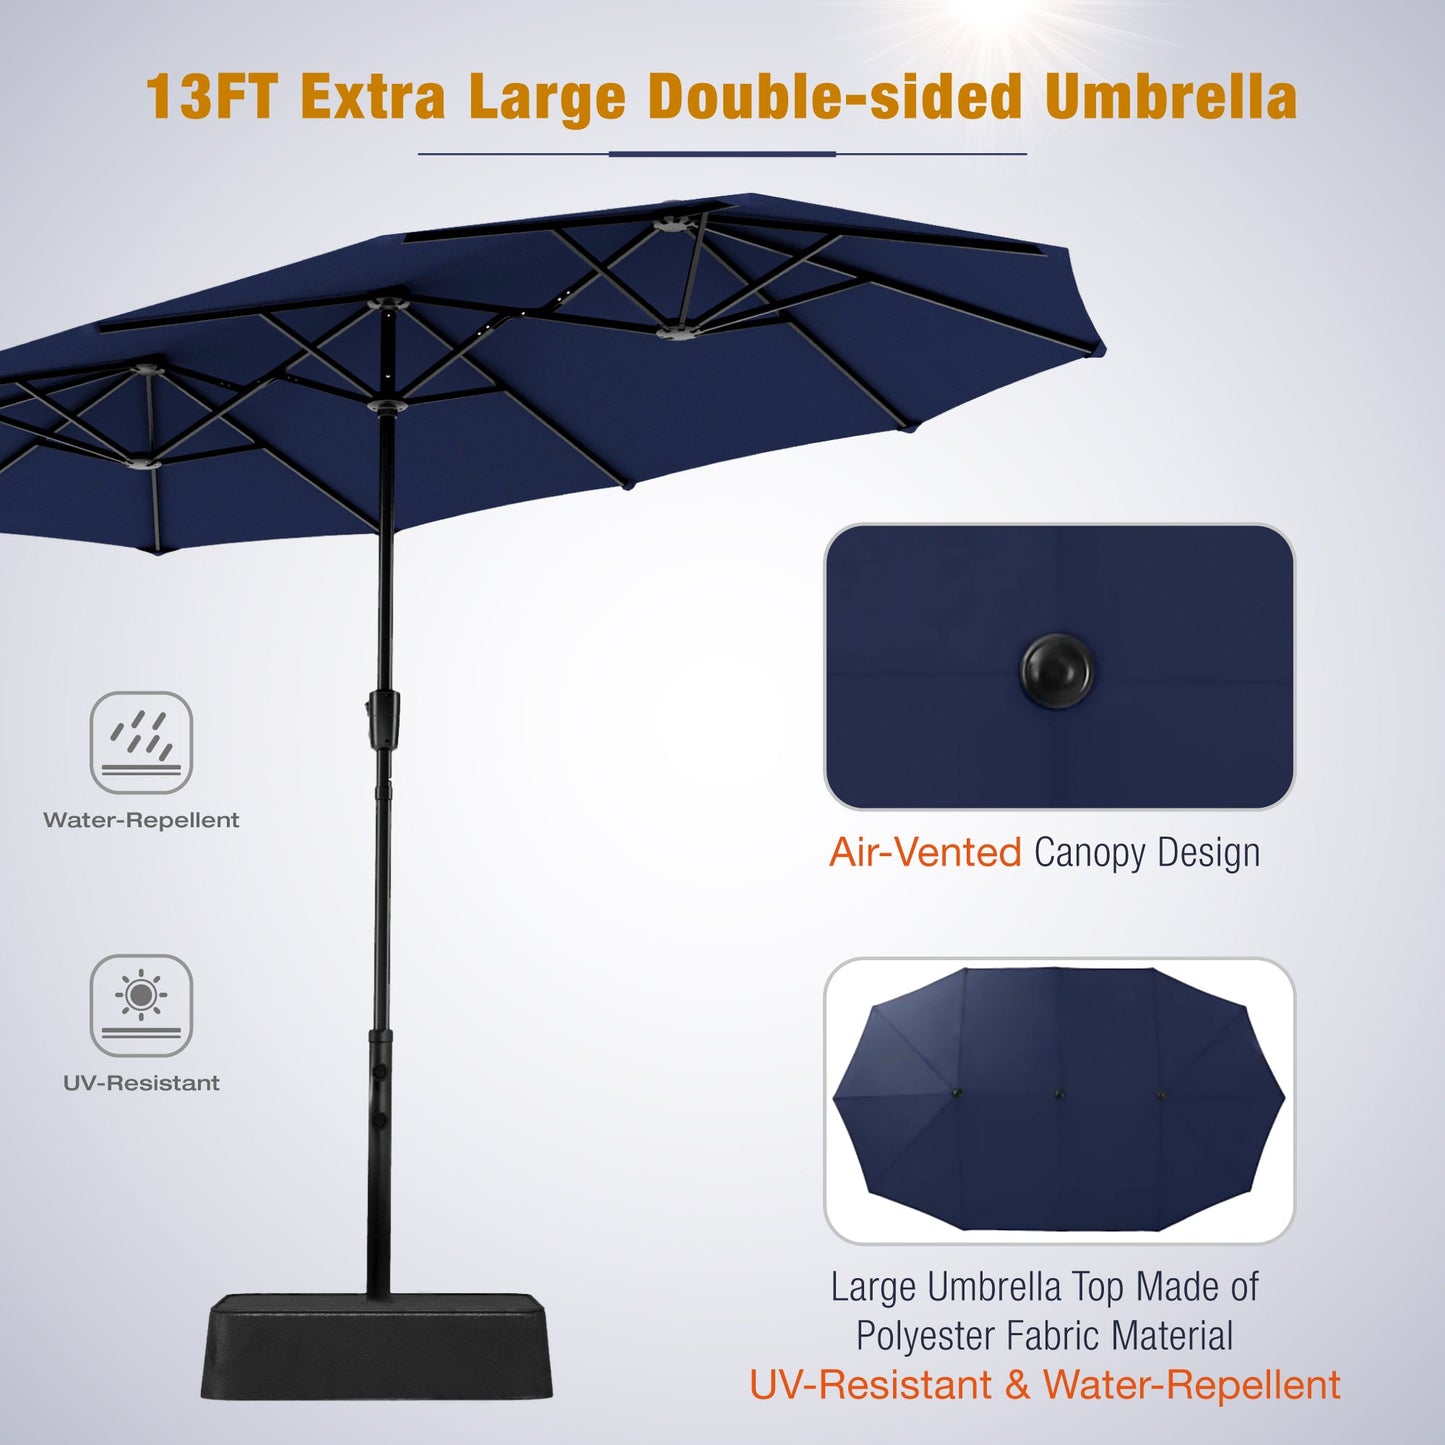 Sophia & William 8-Piece Outdoor Patio Set with 13 ft Umbrella, Rattan Chairs & Rectangle Table for 6, Navy Umbrella